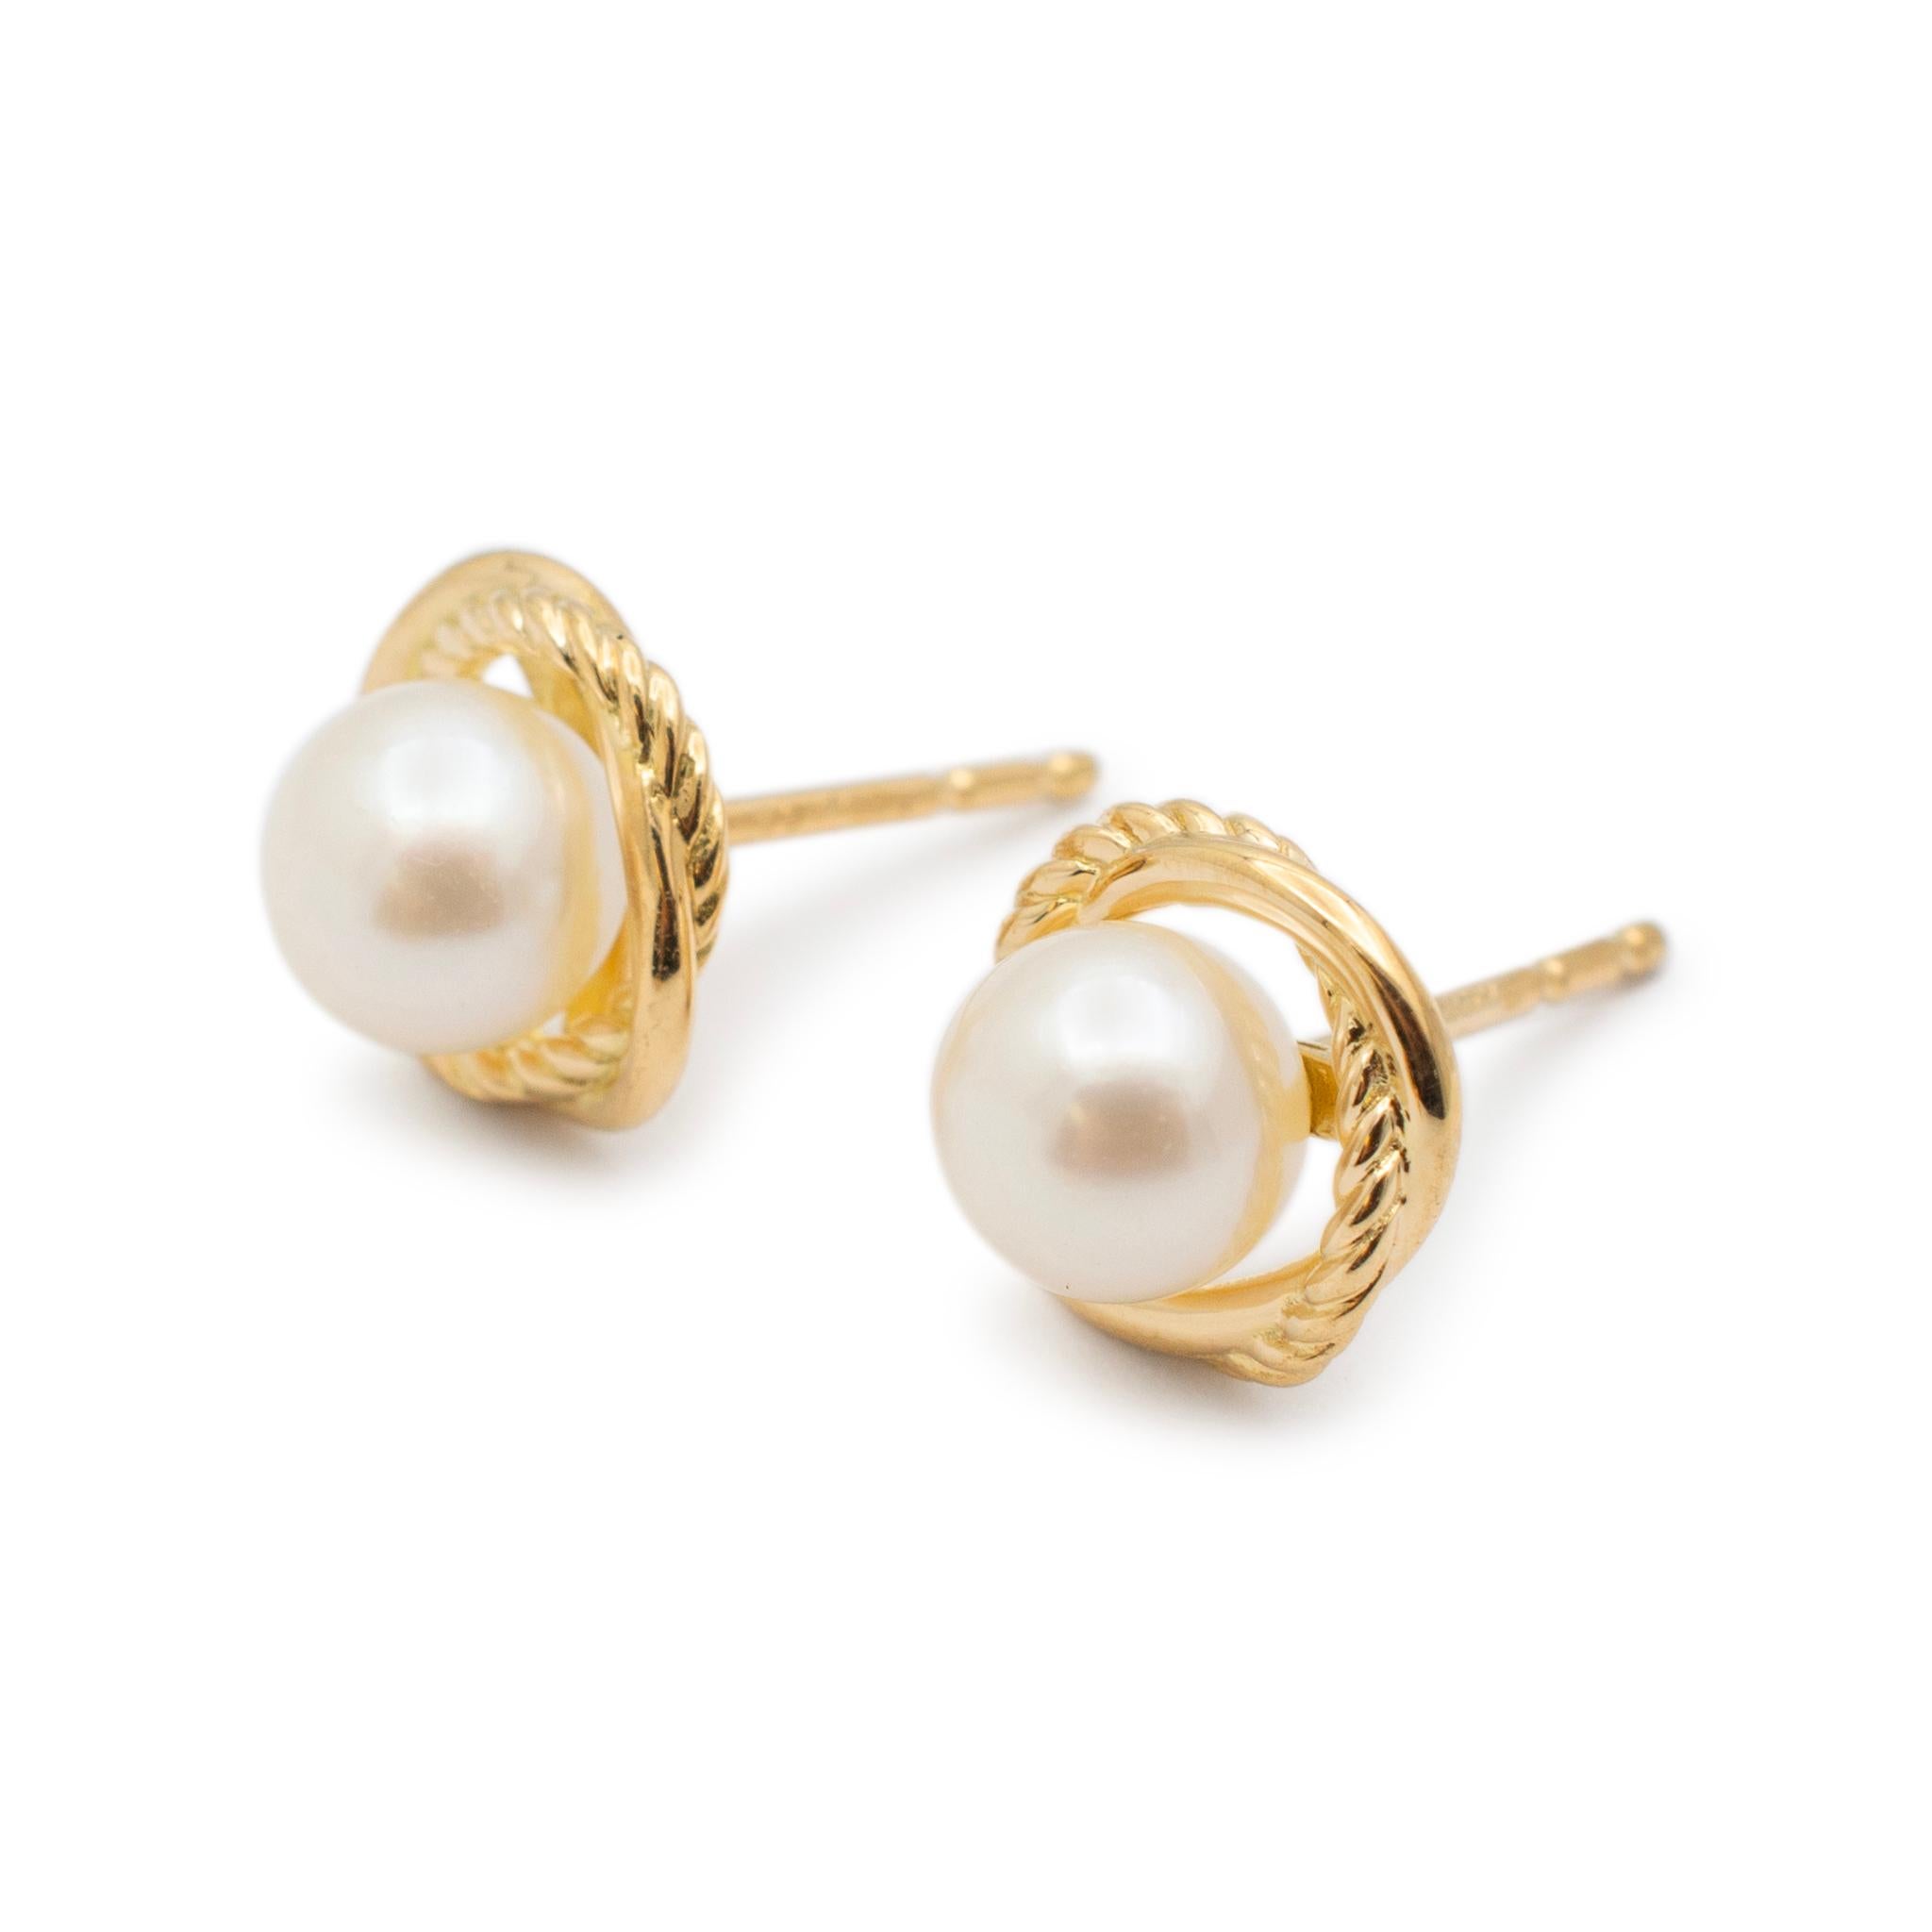 Brand: David Yurman

Gender: Ladies

Metal Type: 18K Yellow Gold

Length: 0.63 Inches

Width: 10.00 mm

Weight: 2.90 grams

Ladies DAVID YURMAN 18K yellow gold pearl stud earrings with push backs. Engraved with 